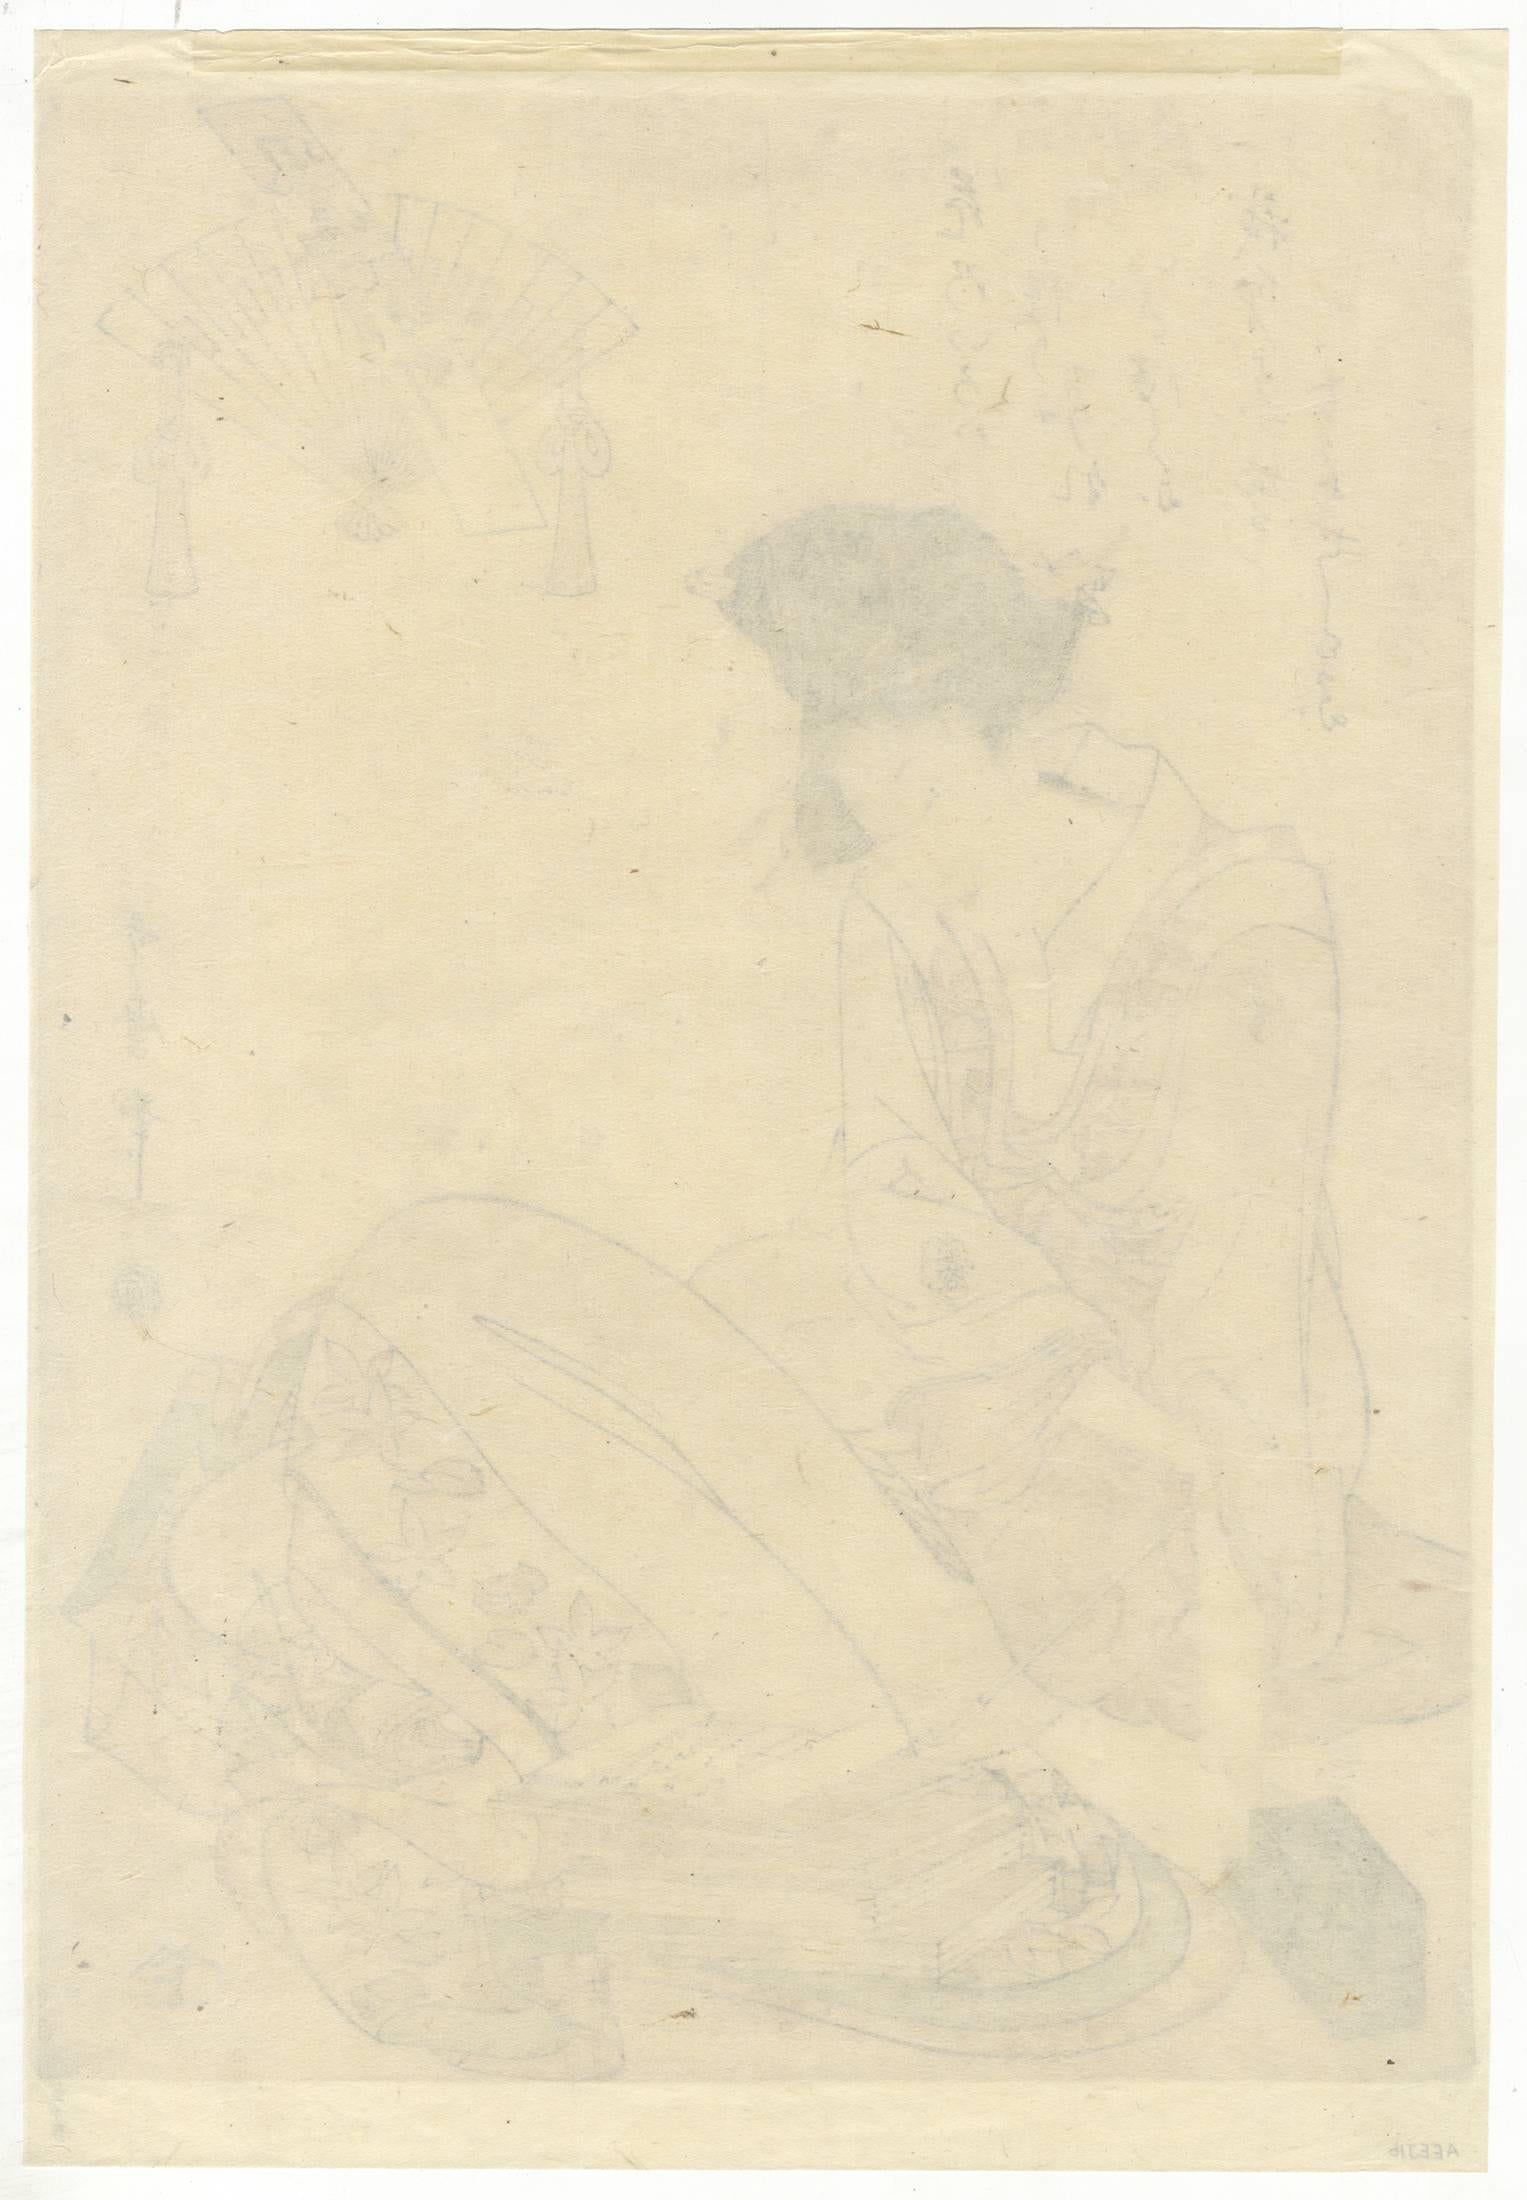 Hand-printed on traditional Japanese washi paper (mulberry tree paper).

Title: Seated woman holding a kiseru pipe and reading books
Series: The seven traditional songs of Ono no Komachi
Artist: Utamaro I Kitagawa
Publisher: Iseya Soemon 
Published: